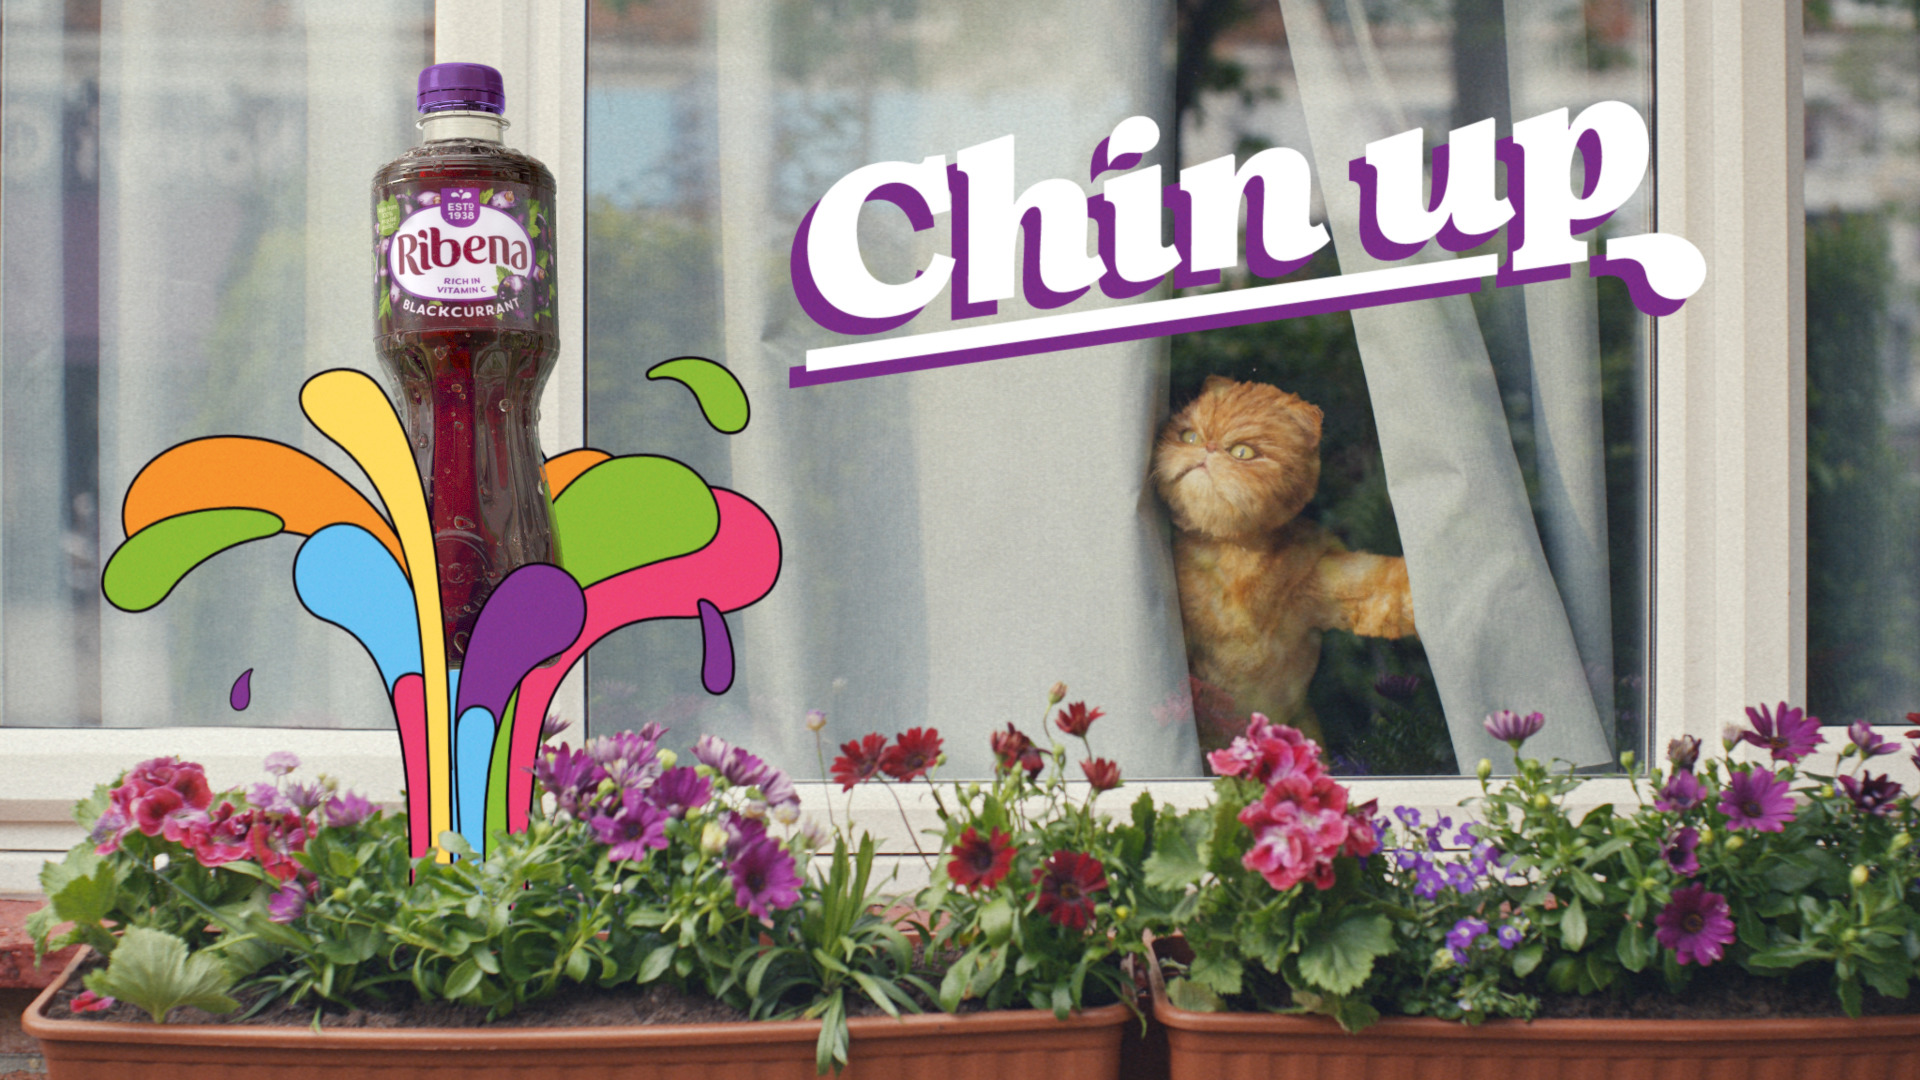 Ribena unveils new brand positioning with £7m campaign